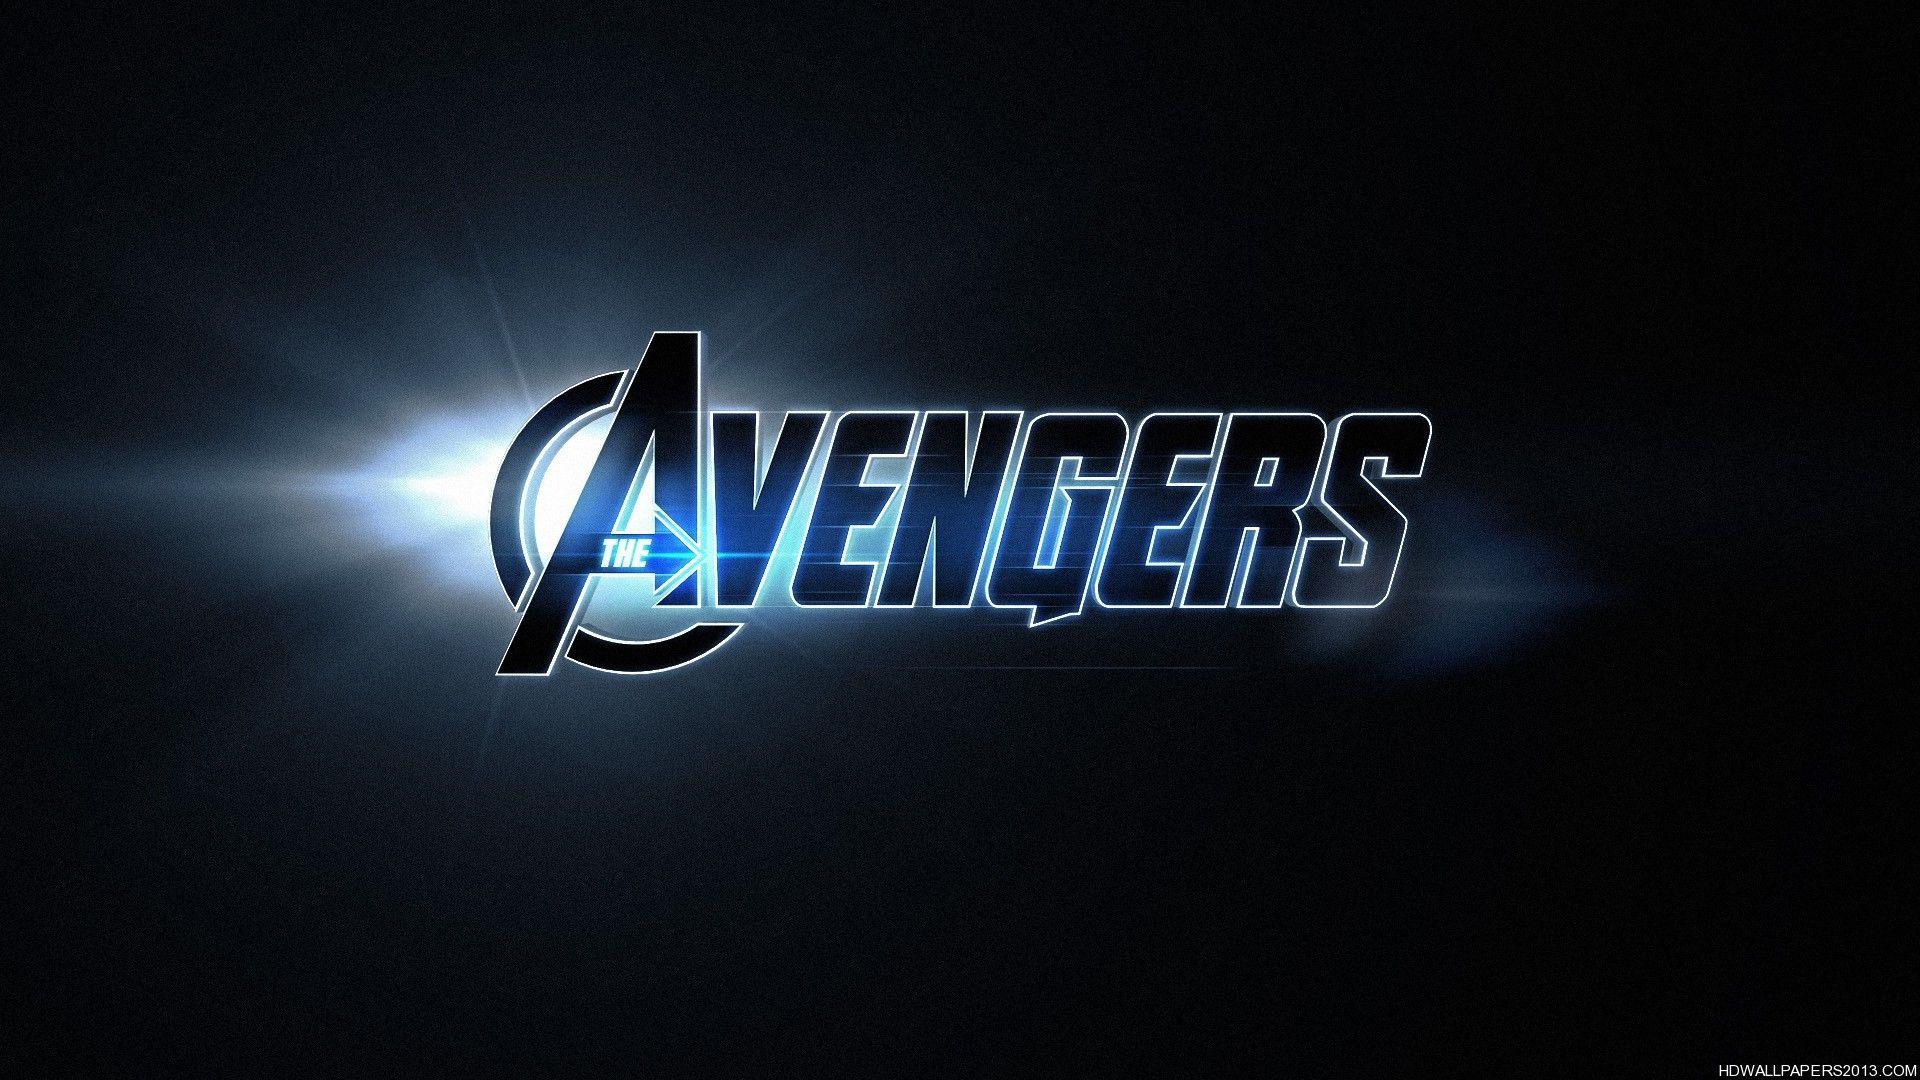 The Avengers Logo Wallpapers wallpapers